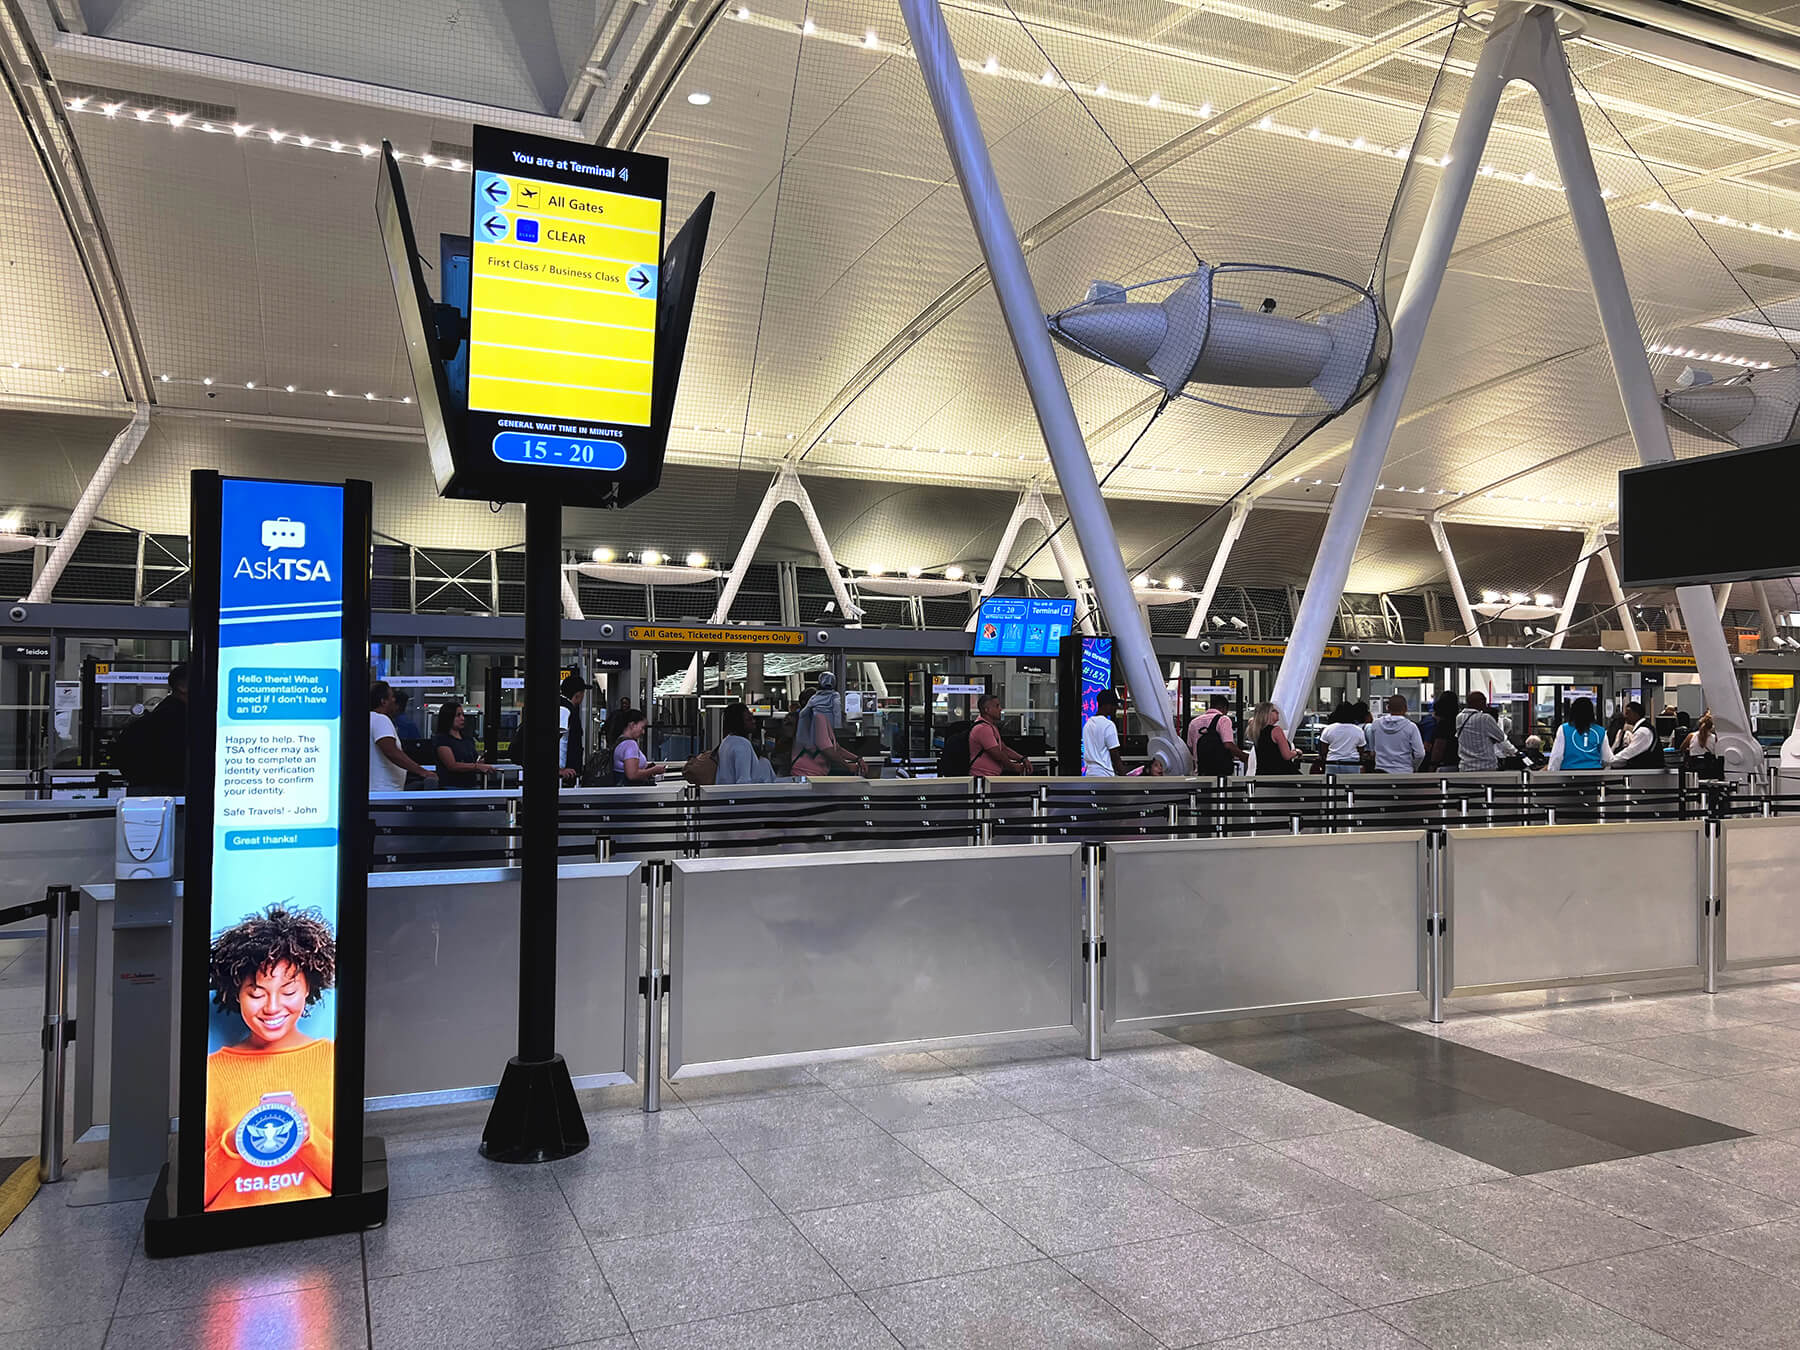 This solution aims to help deliver better and faster security checkpoints at JFK T4